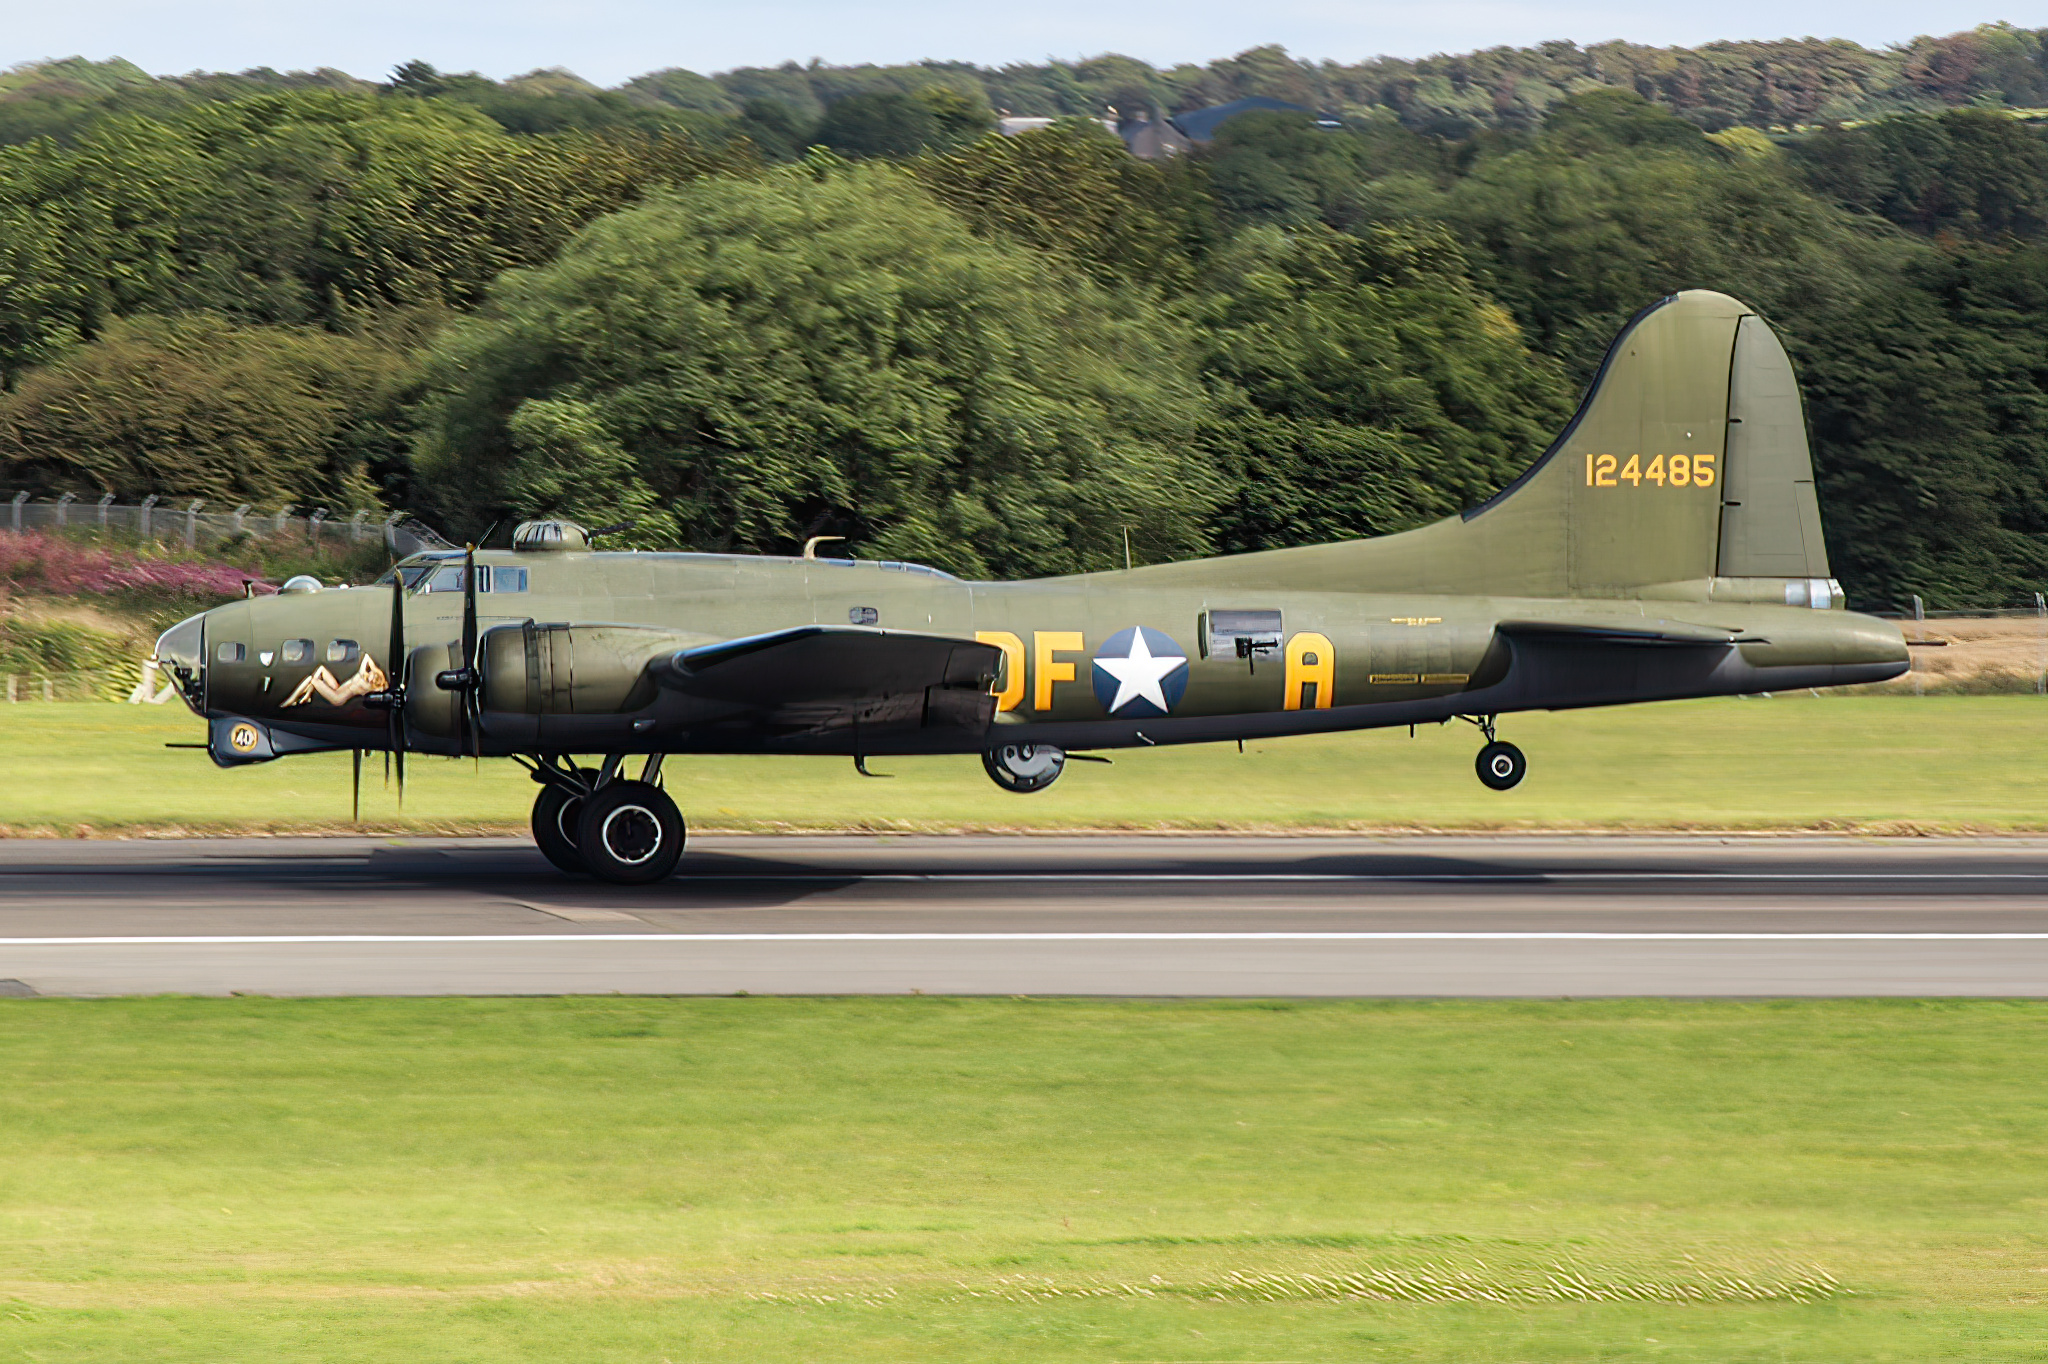 G-BEDF / 124485 Boeing B-17G Flying Fortress "Sally B" departing Prestwick Airport